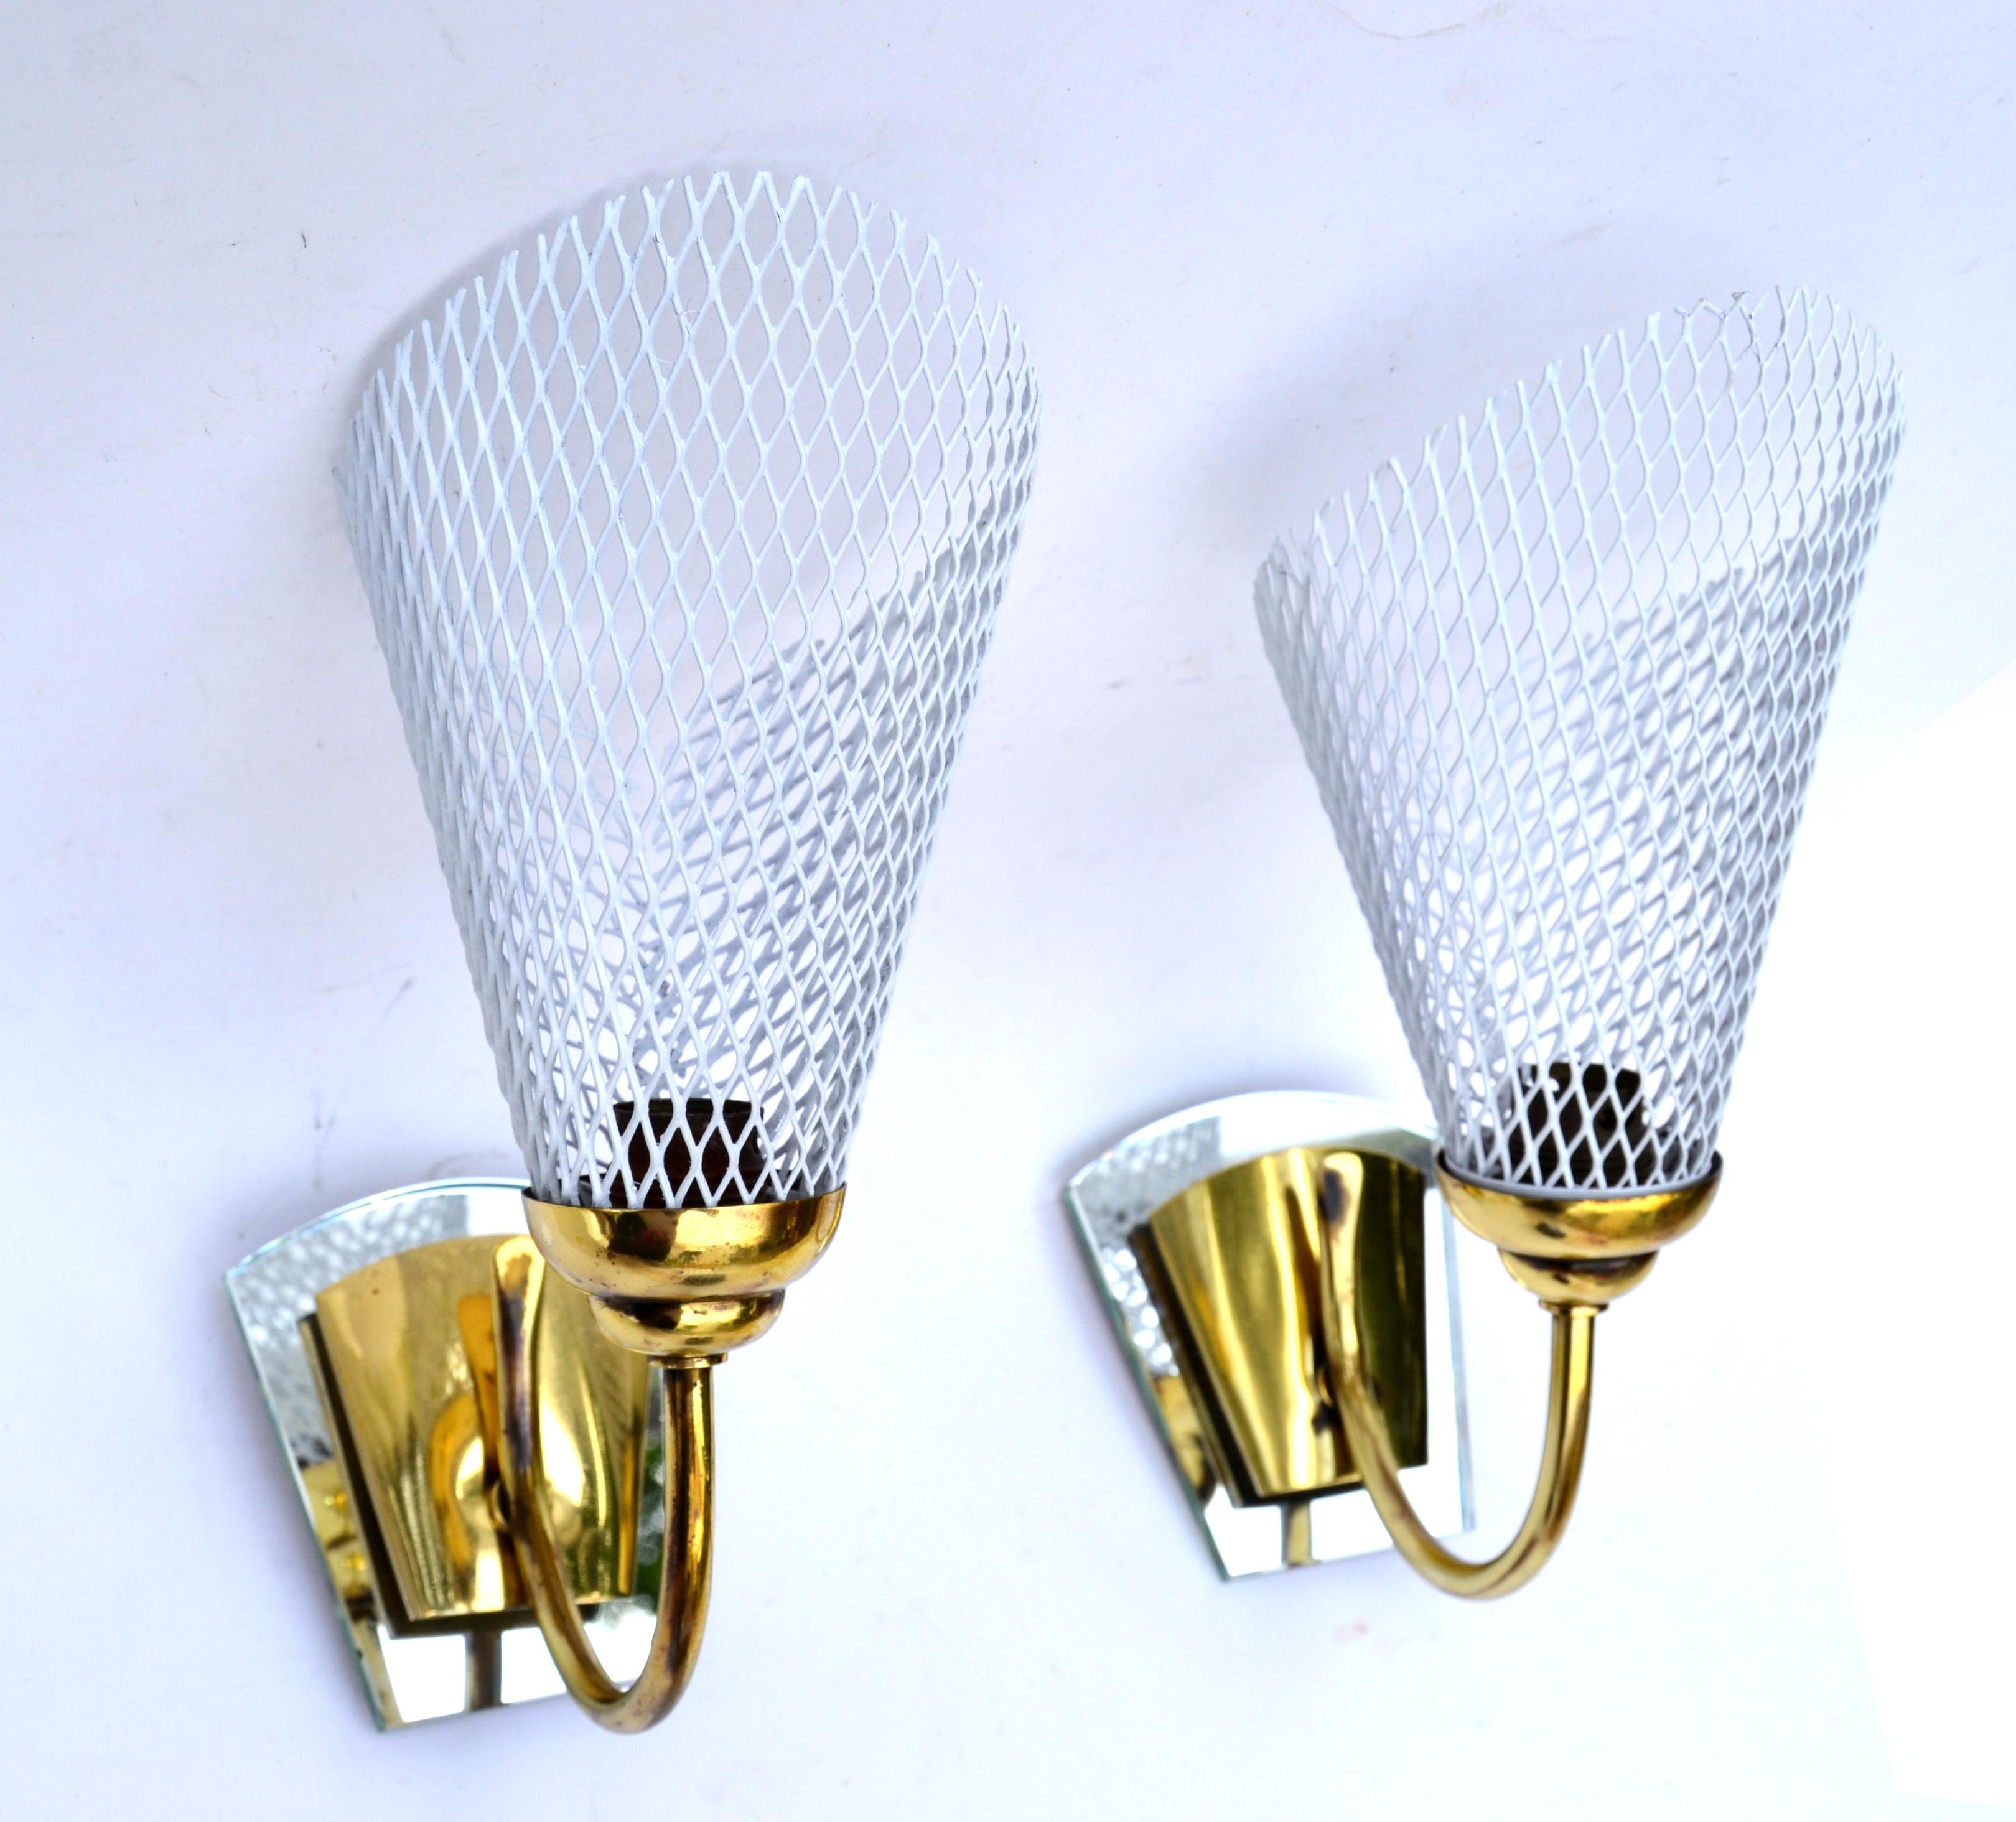 Pair of superb French Mid-Century Modern Mathieu Matégot sconces, wall lamps from the 1960.
Metal mesh shades in white finish and Brass Detail with Mirrored Wall Plates..
US rewired and each socket takes one light bulb max. 60 watts.
Projection